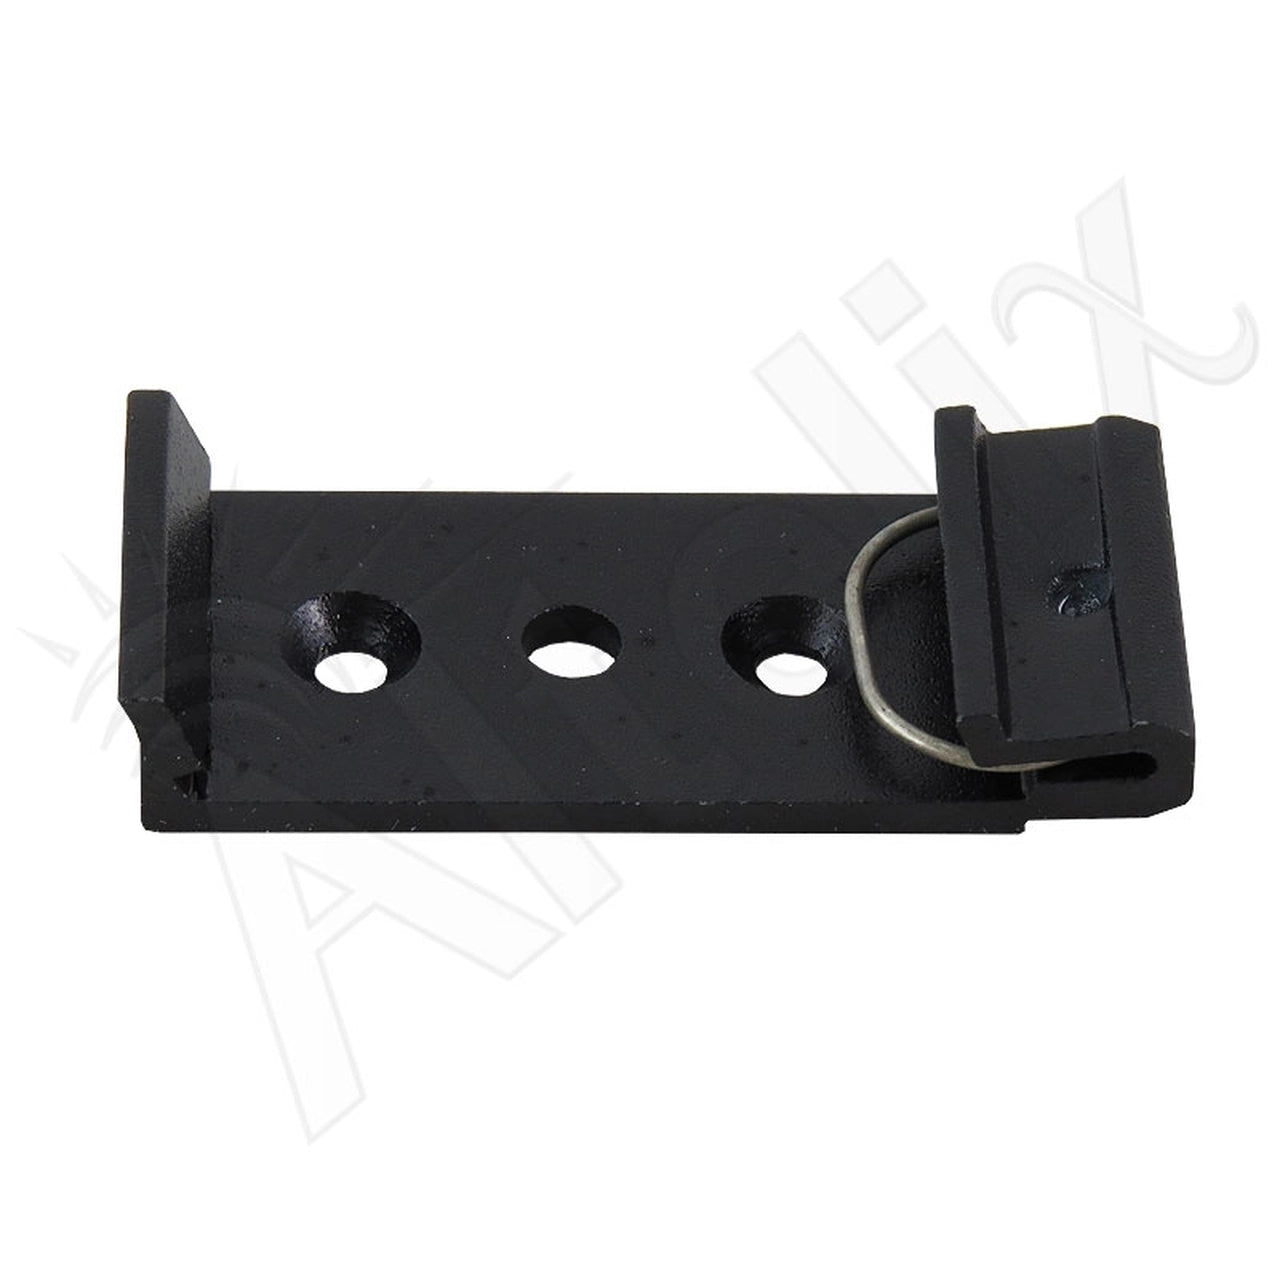 20mm Wide Aluminum DIN Rail Mounting Clip for 35mm Top Hat Rail